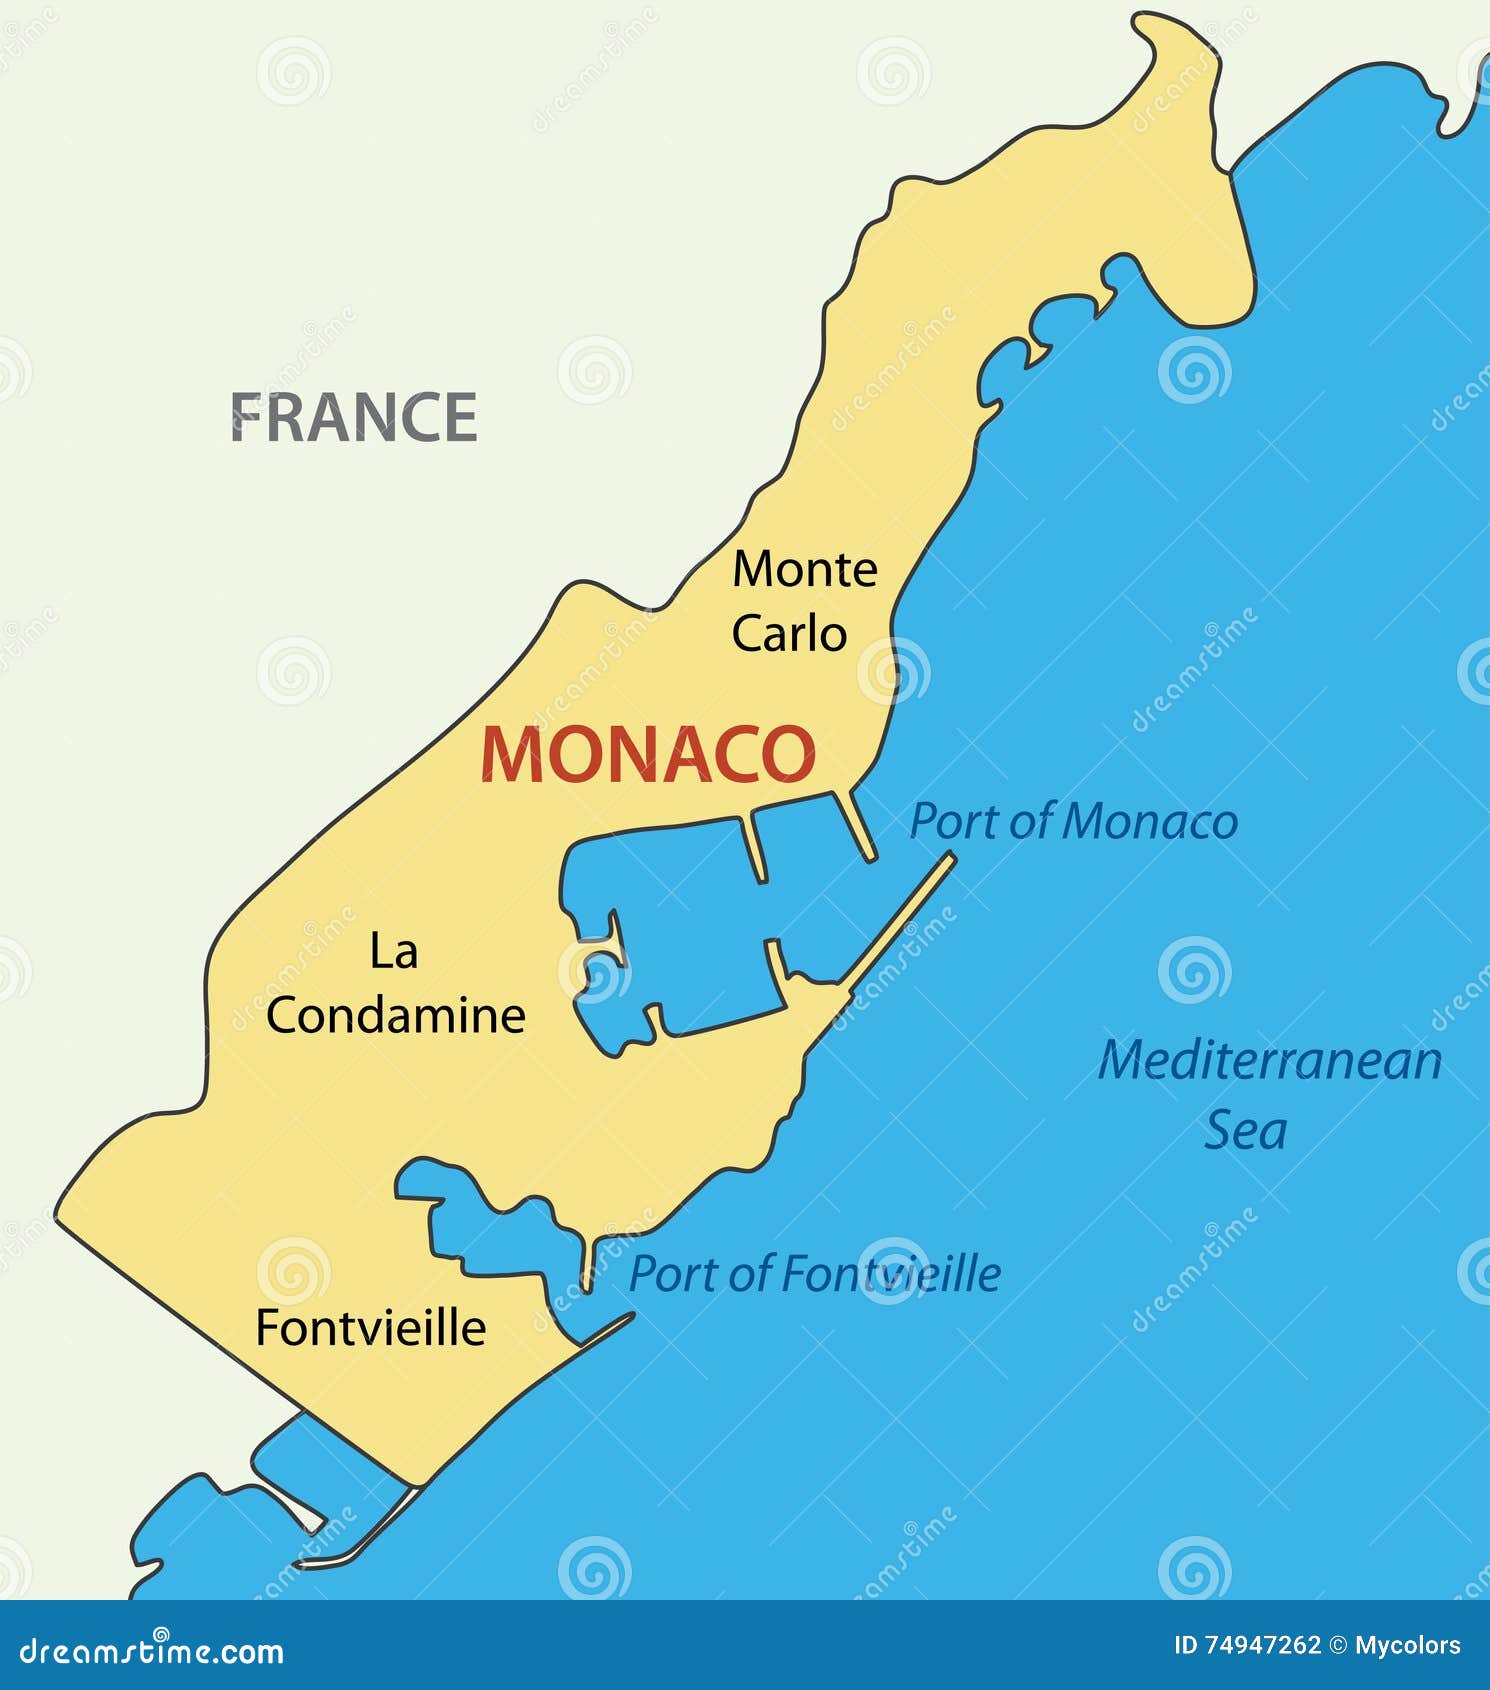 principality of monaco - map of country - 